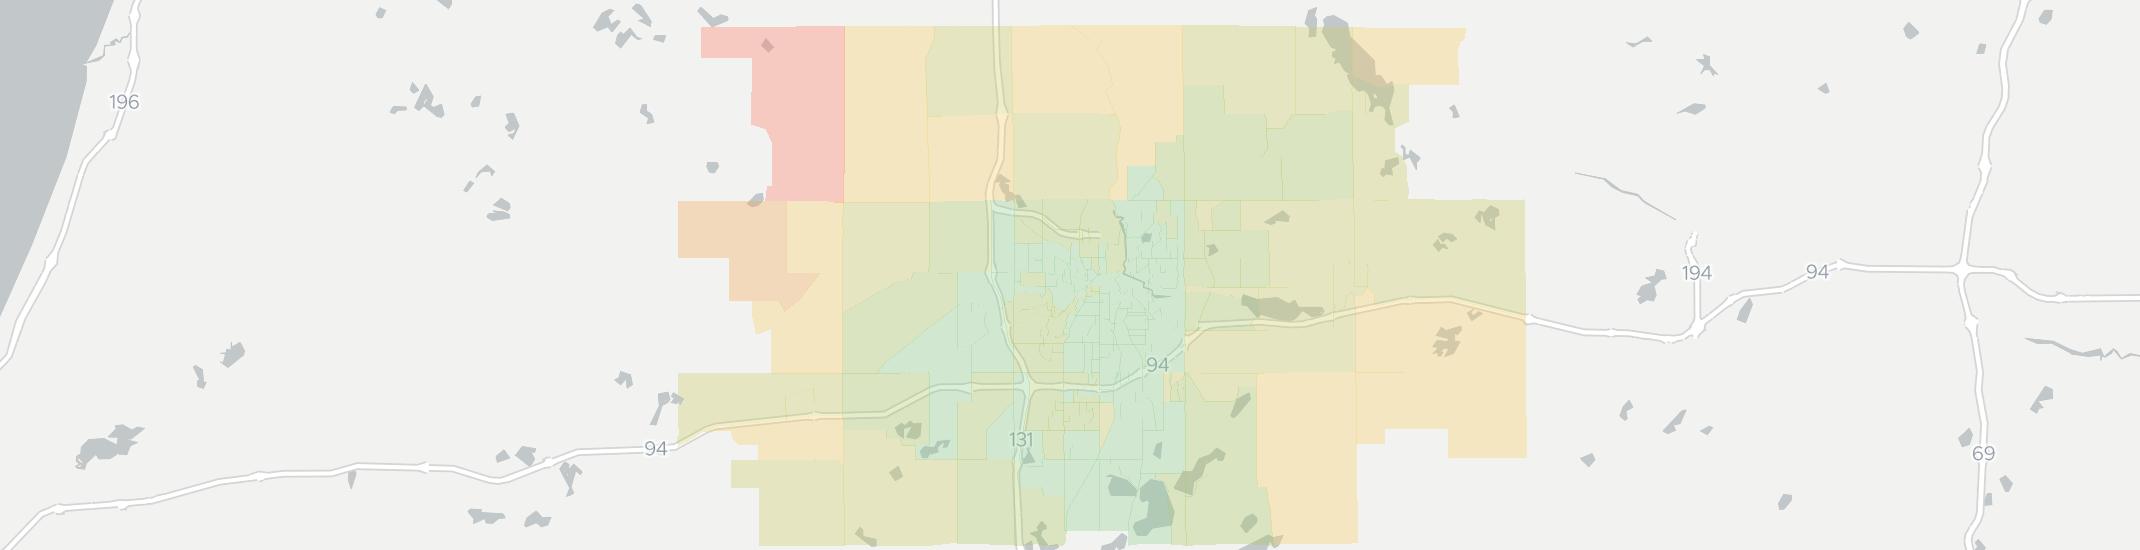 Kalamazoo Internet Competition Map. Click for interactive map.